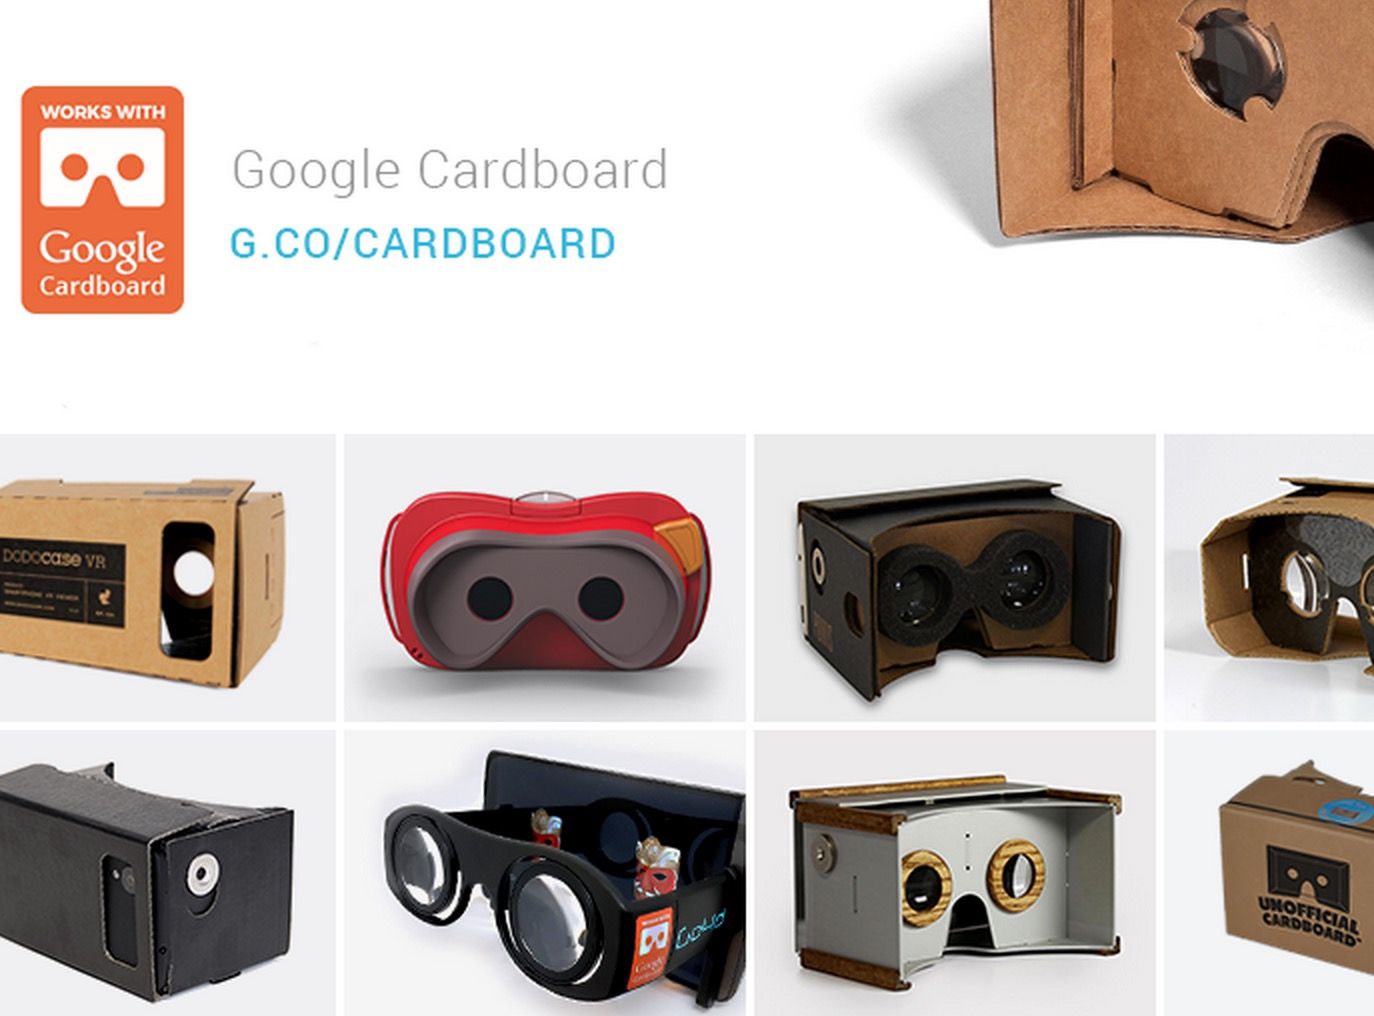 google s works with cardboard aims to certify vr viewers and optimise app experiences image 1